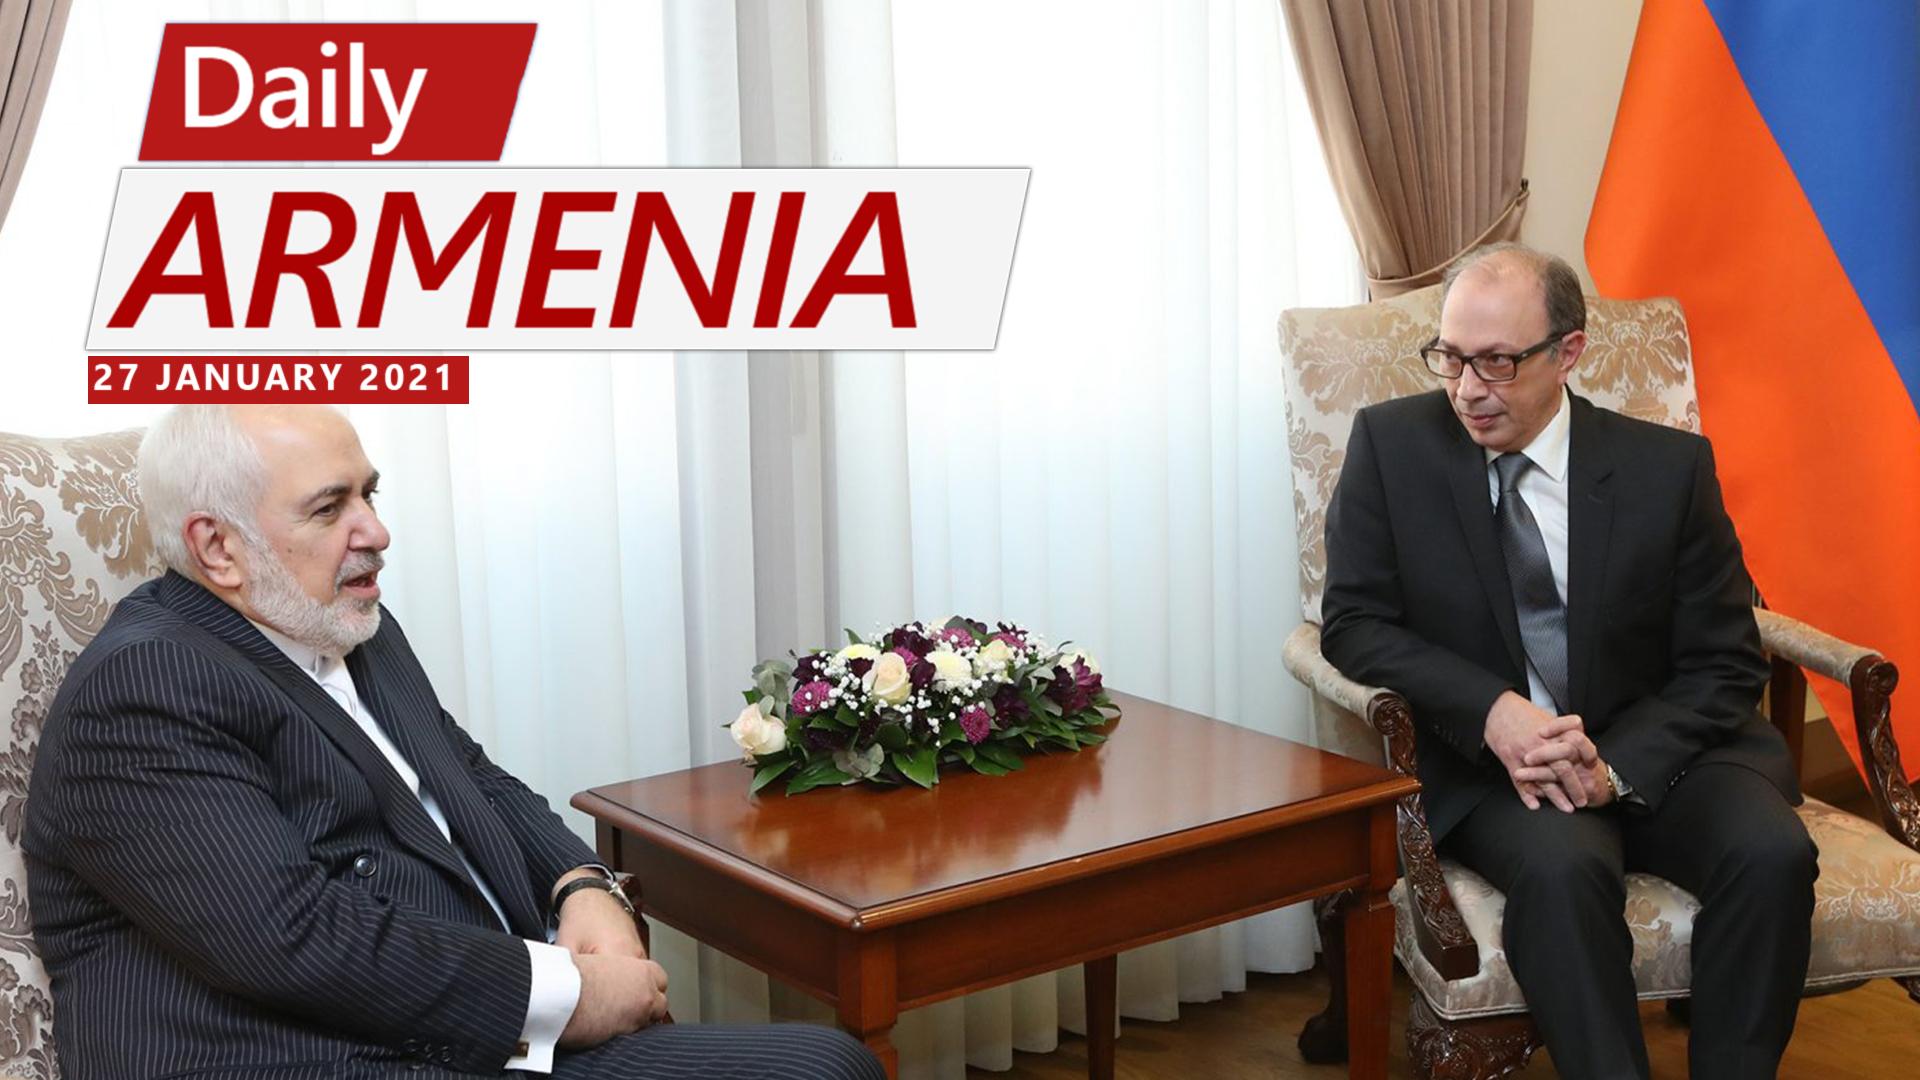 Iran’s Foreign Minister is in Armenia with New Regional Considerations